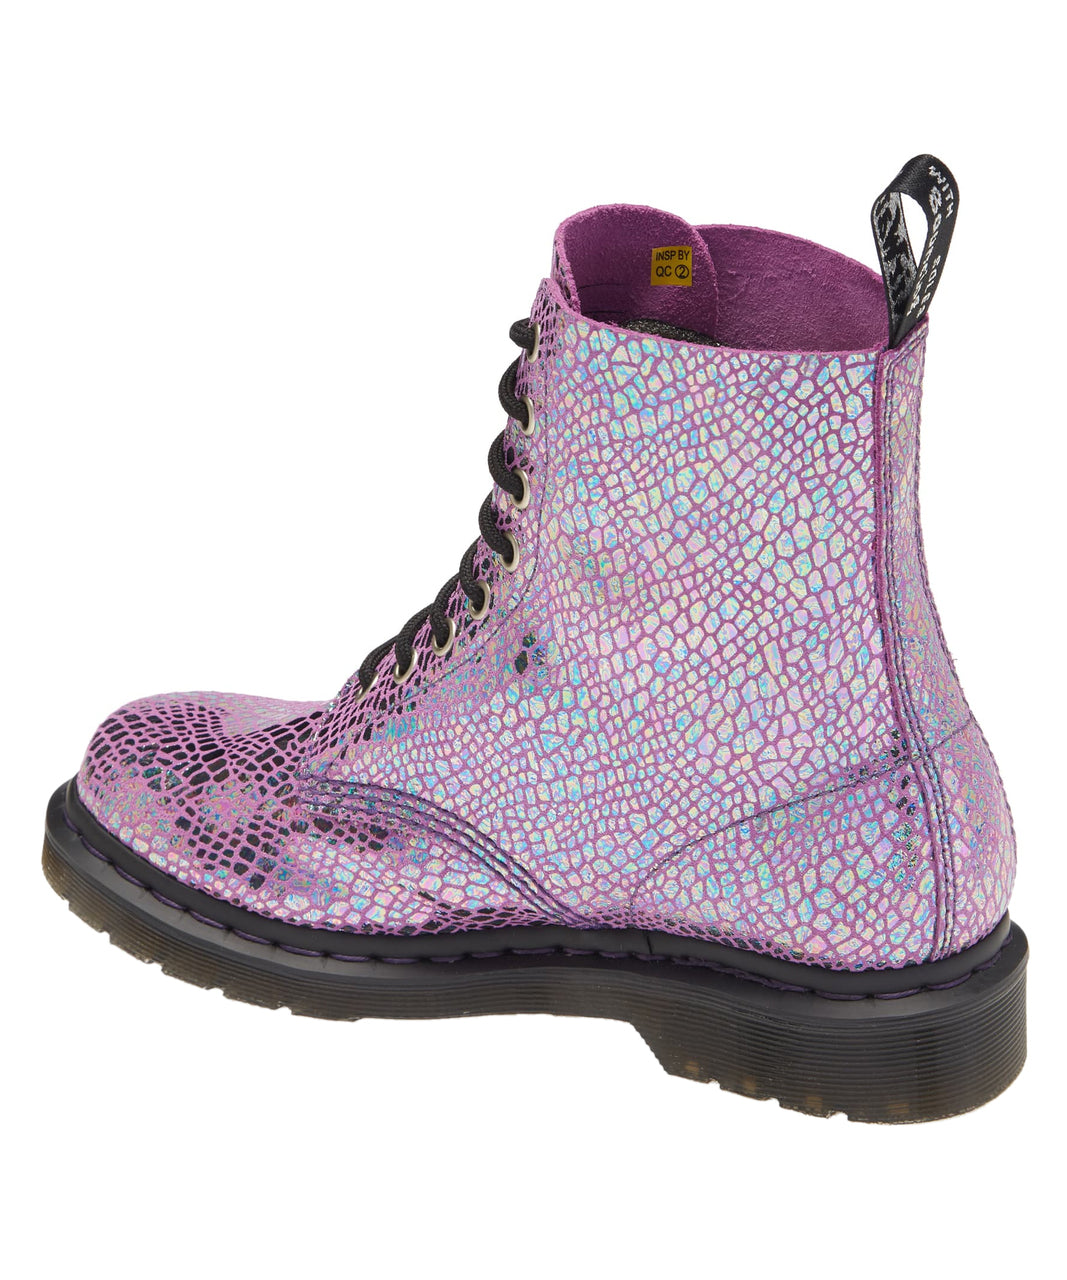 1460 PASCAL VIOLET MIRROR SHIFT SUEDE SNAKE BOOT